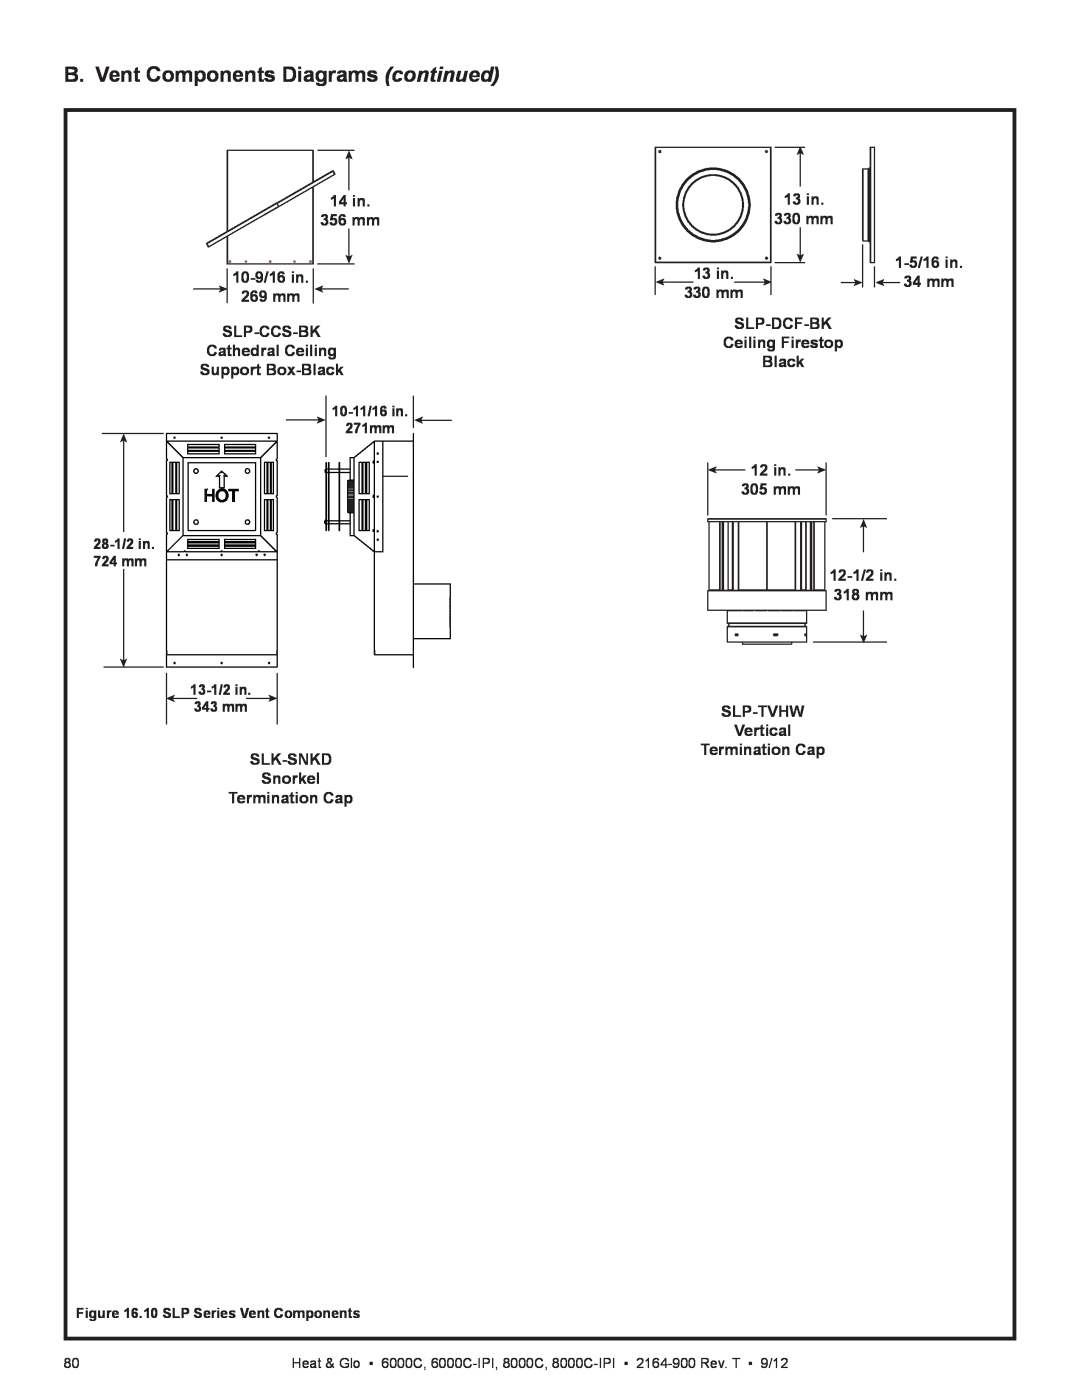 Heat & Glo LifeStyle 6000C manual B. Vent Components Diagrams continued, 14 in 356 mm 10-9/16in 269 mm SLP-CCS-BK 